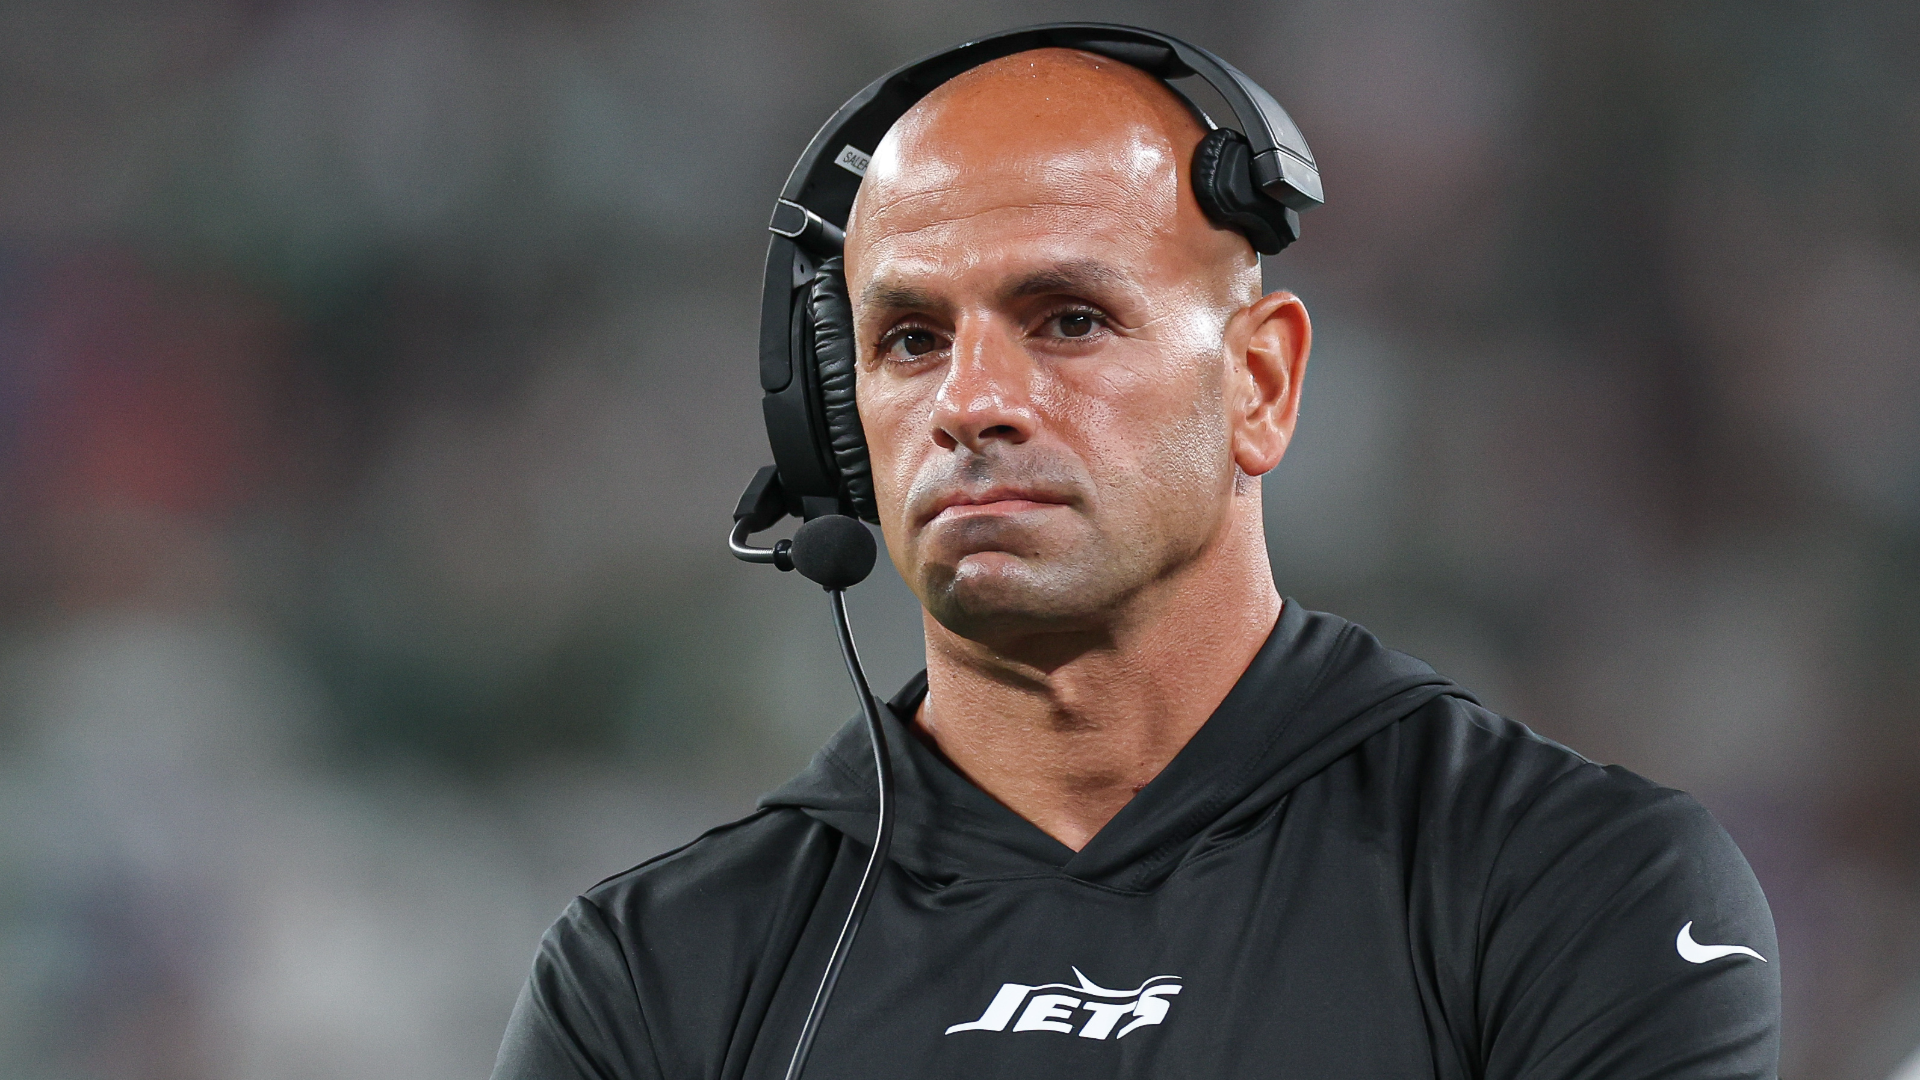 Jets’ Robert Saleh Rejects Theory About Aaron Rodgers’ Injury